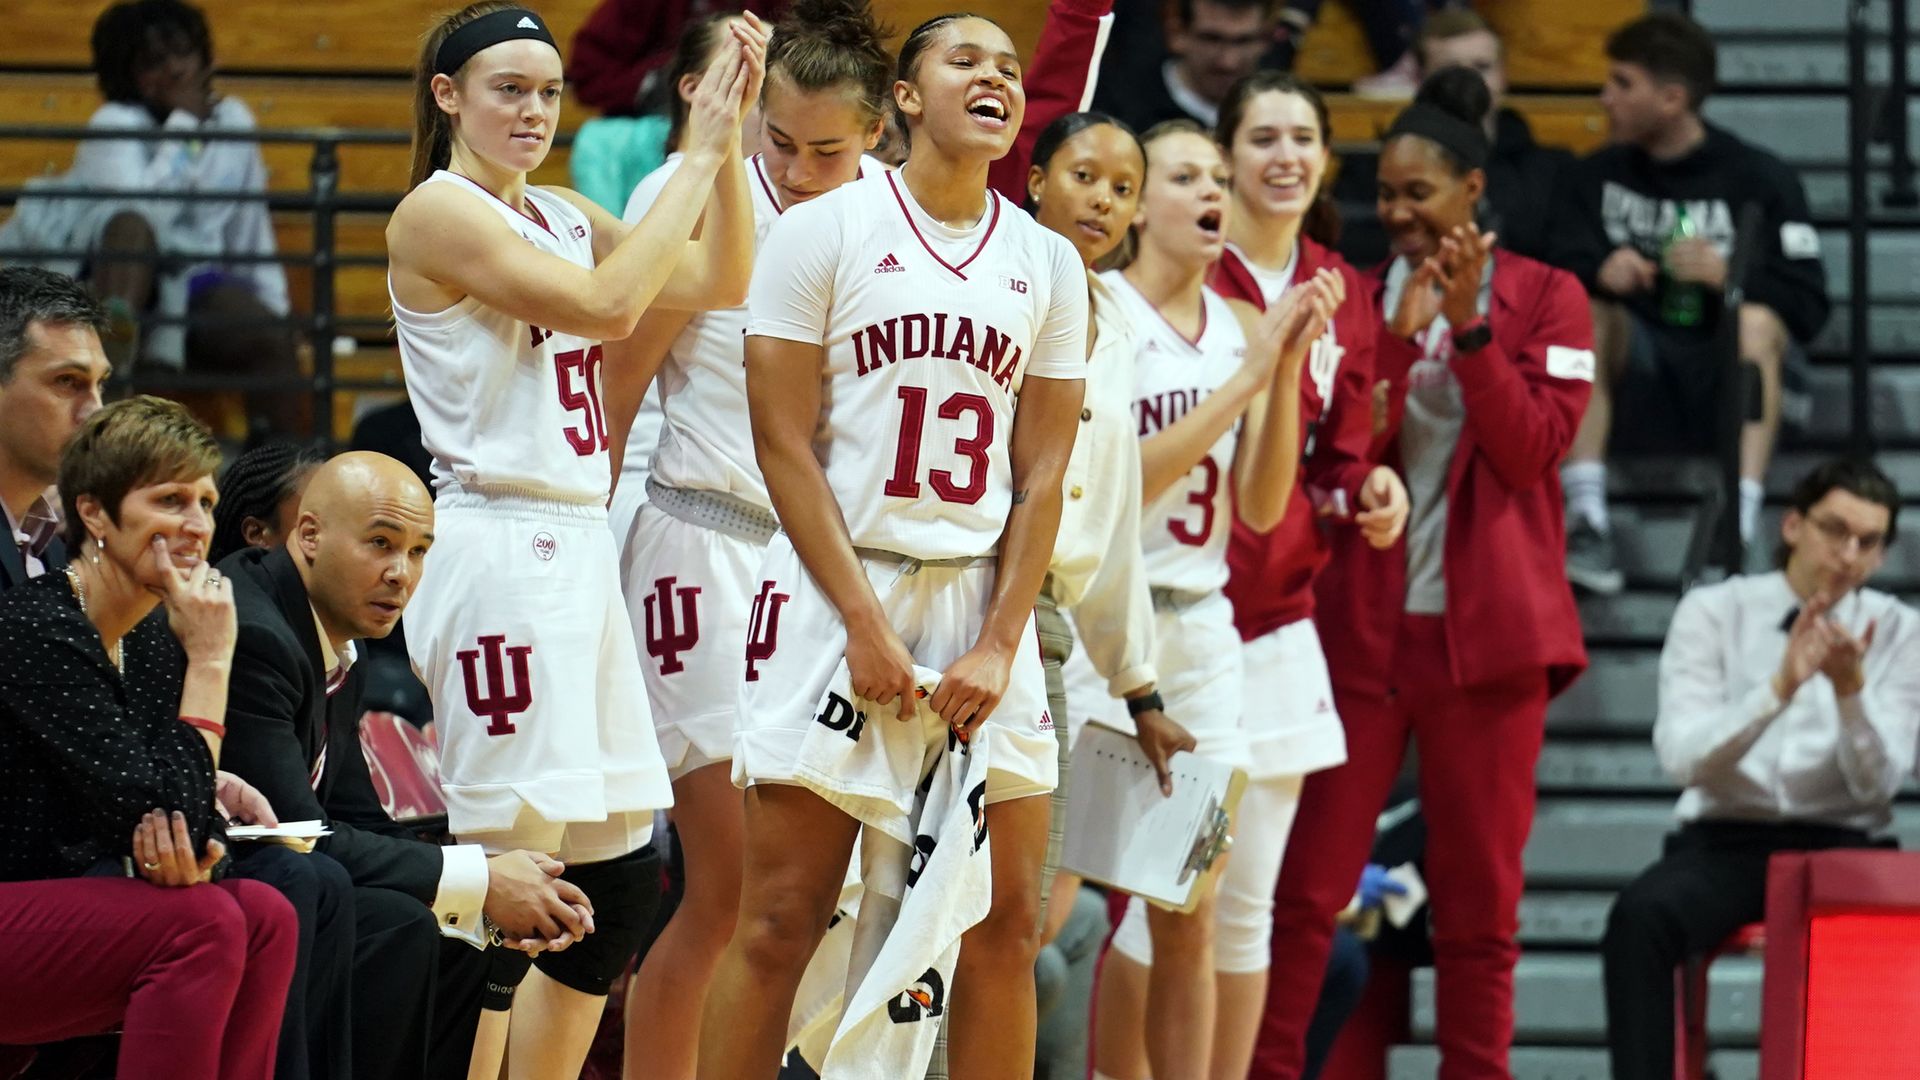 The Indiana Hoosiers celebrate after the NCAA Women's College Basketball game